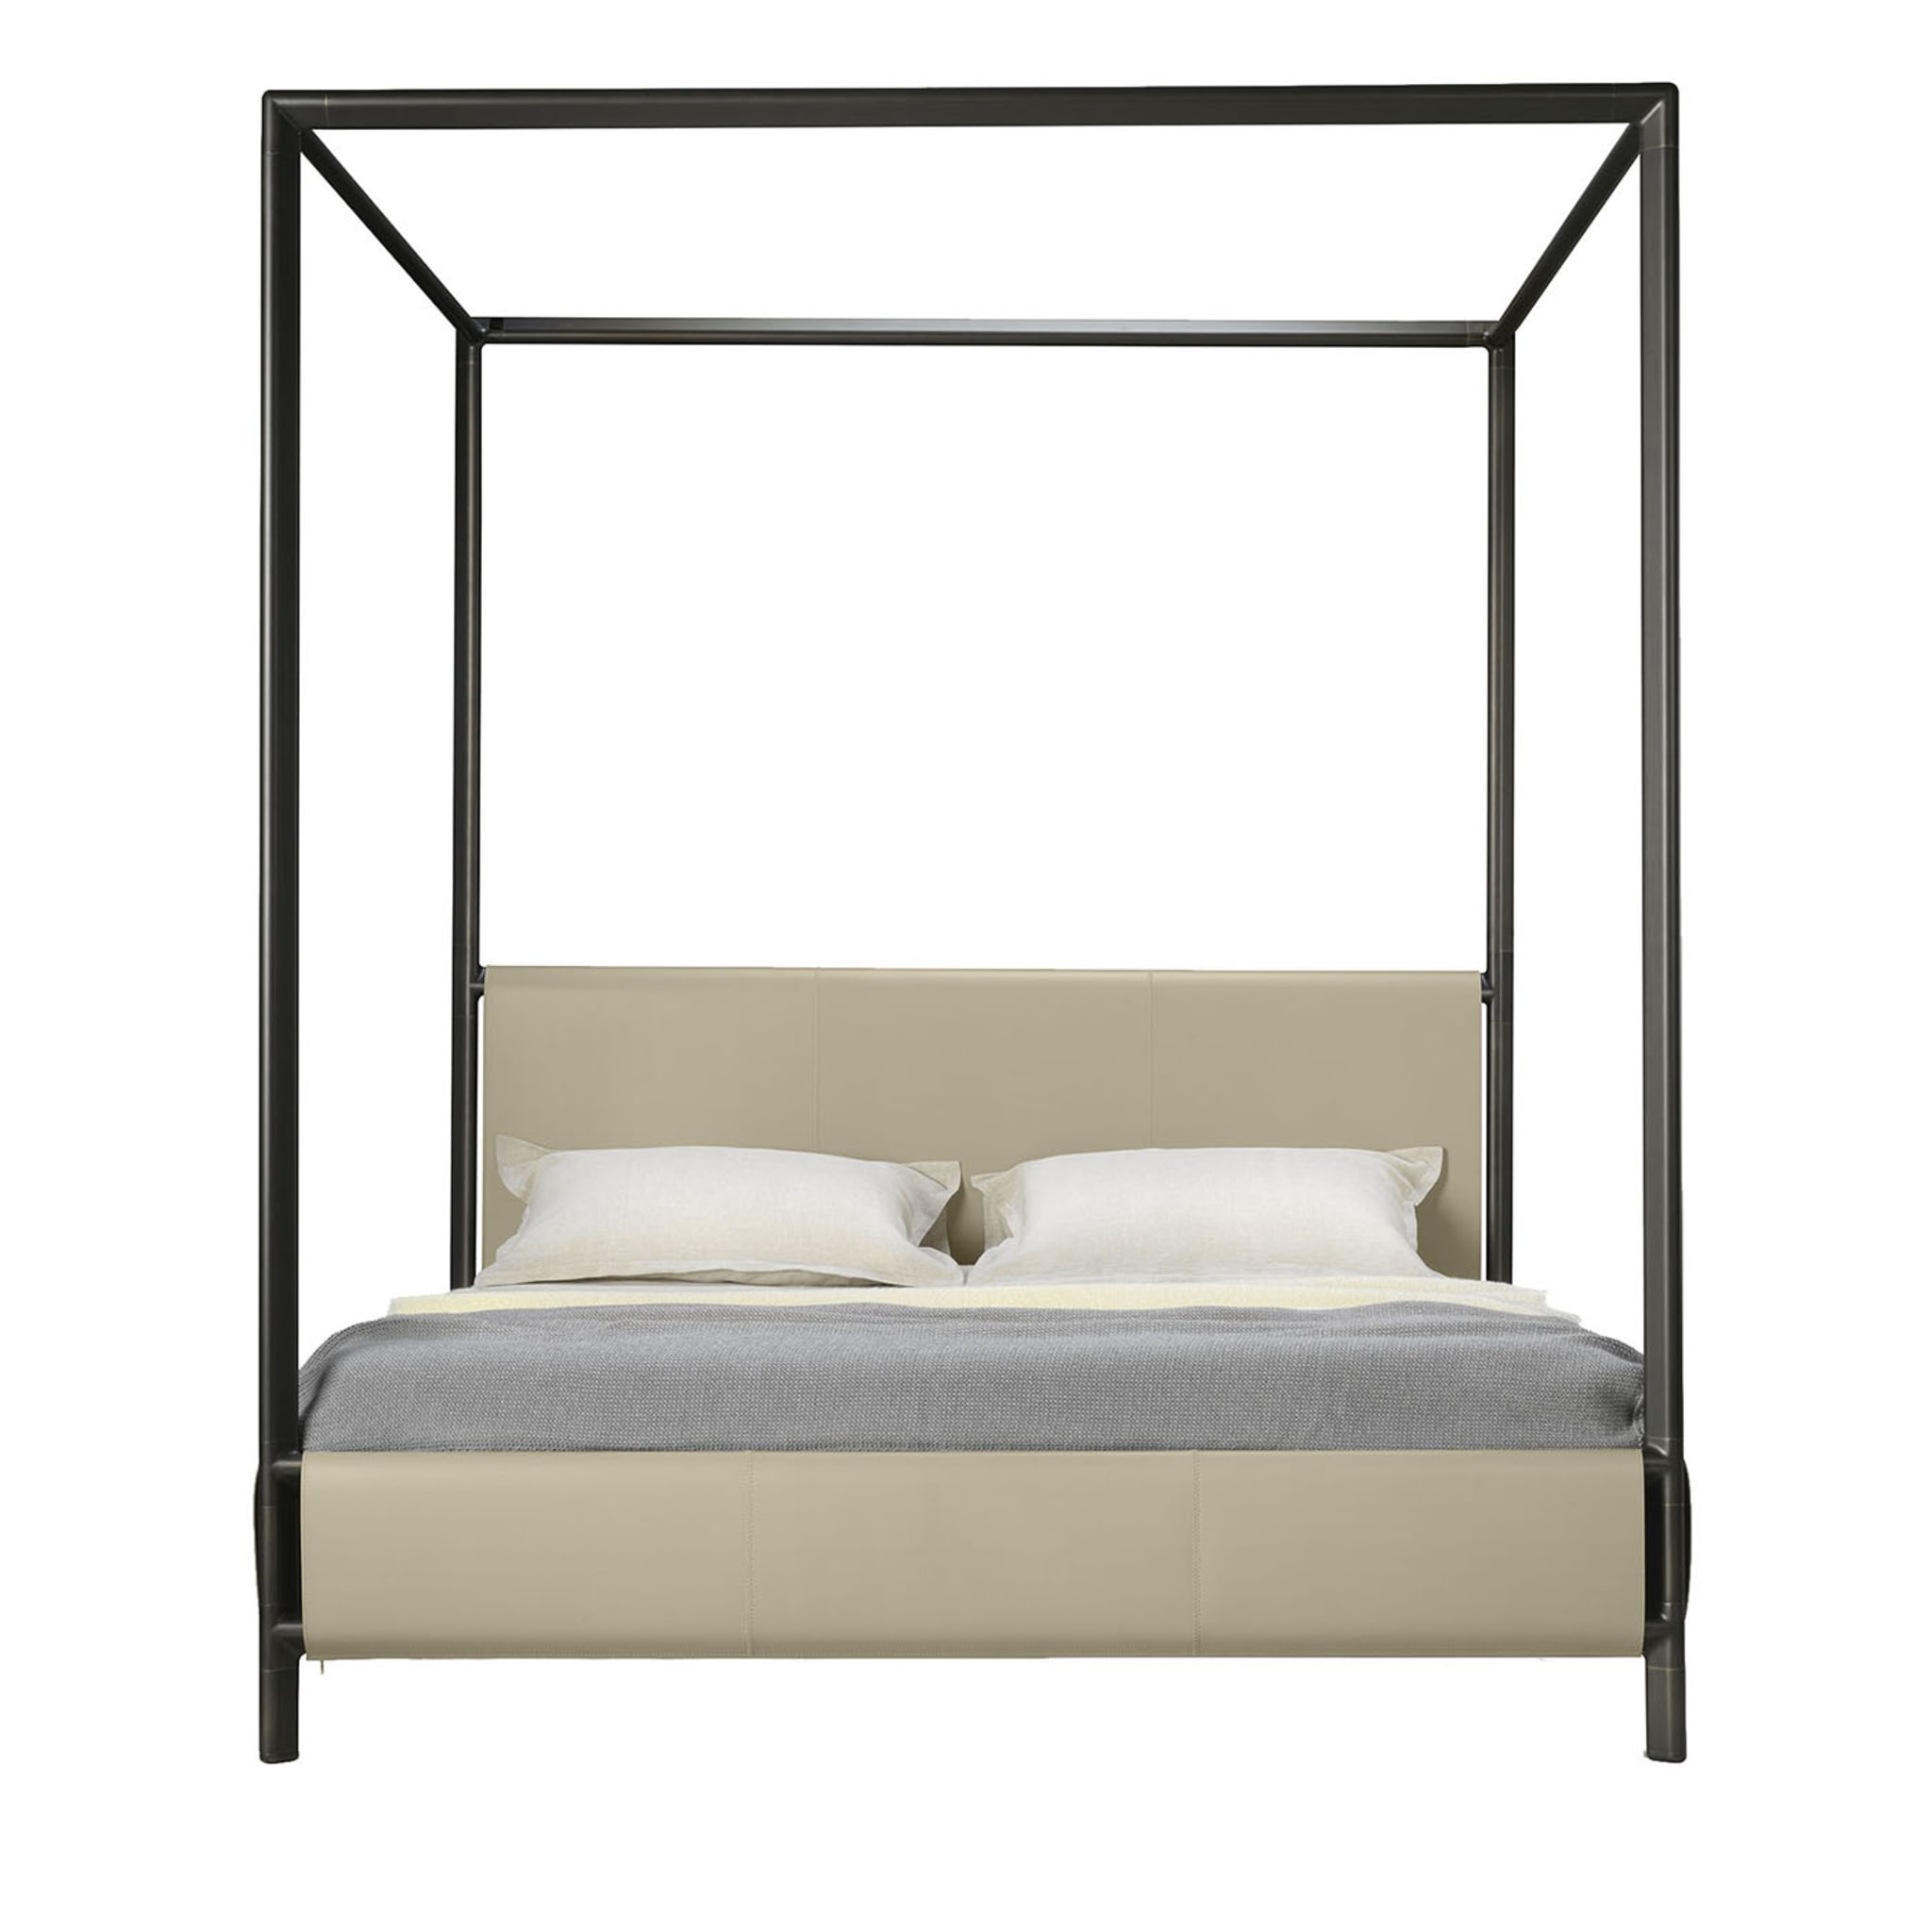 Frame Canopy Bed by Stefano Giovannoni - Main view